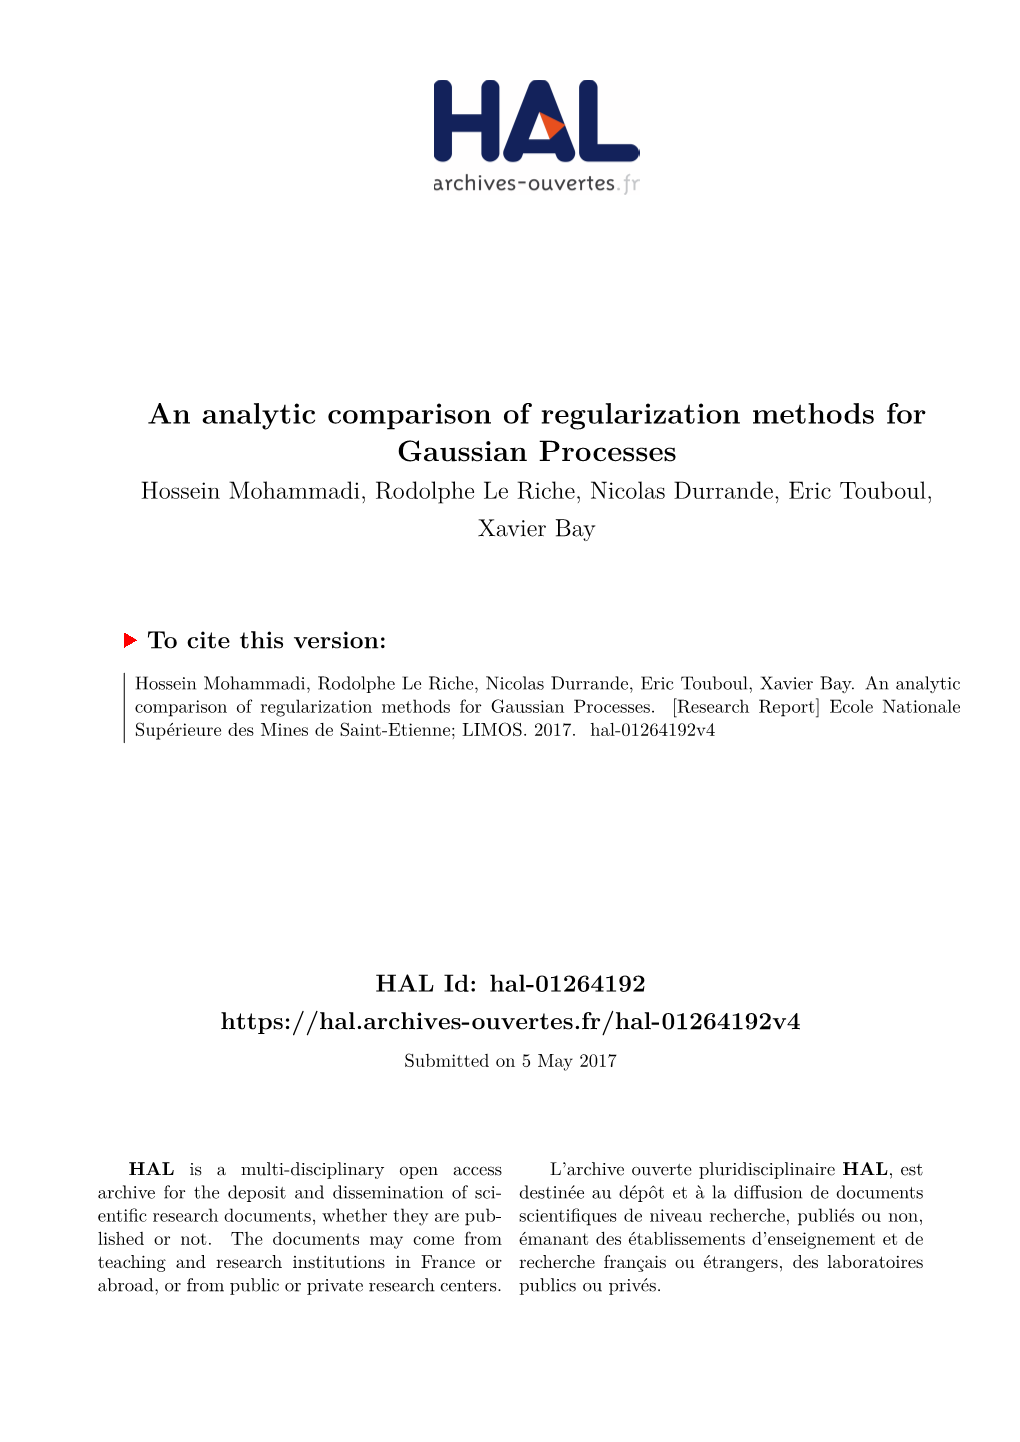 An Analytic Comparison of Regularization Methods for Gaussian Processes Hossein Mohammadi, Rodolphe Le Riche, Nicolas Durrande, Eric Touboul, Xavier Bay